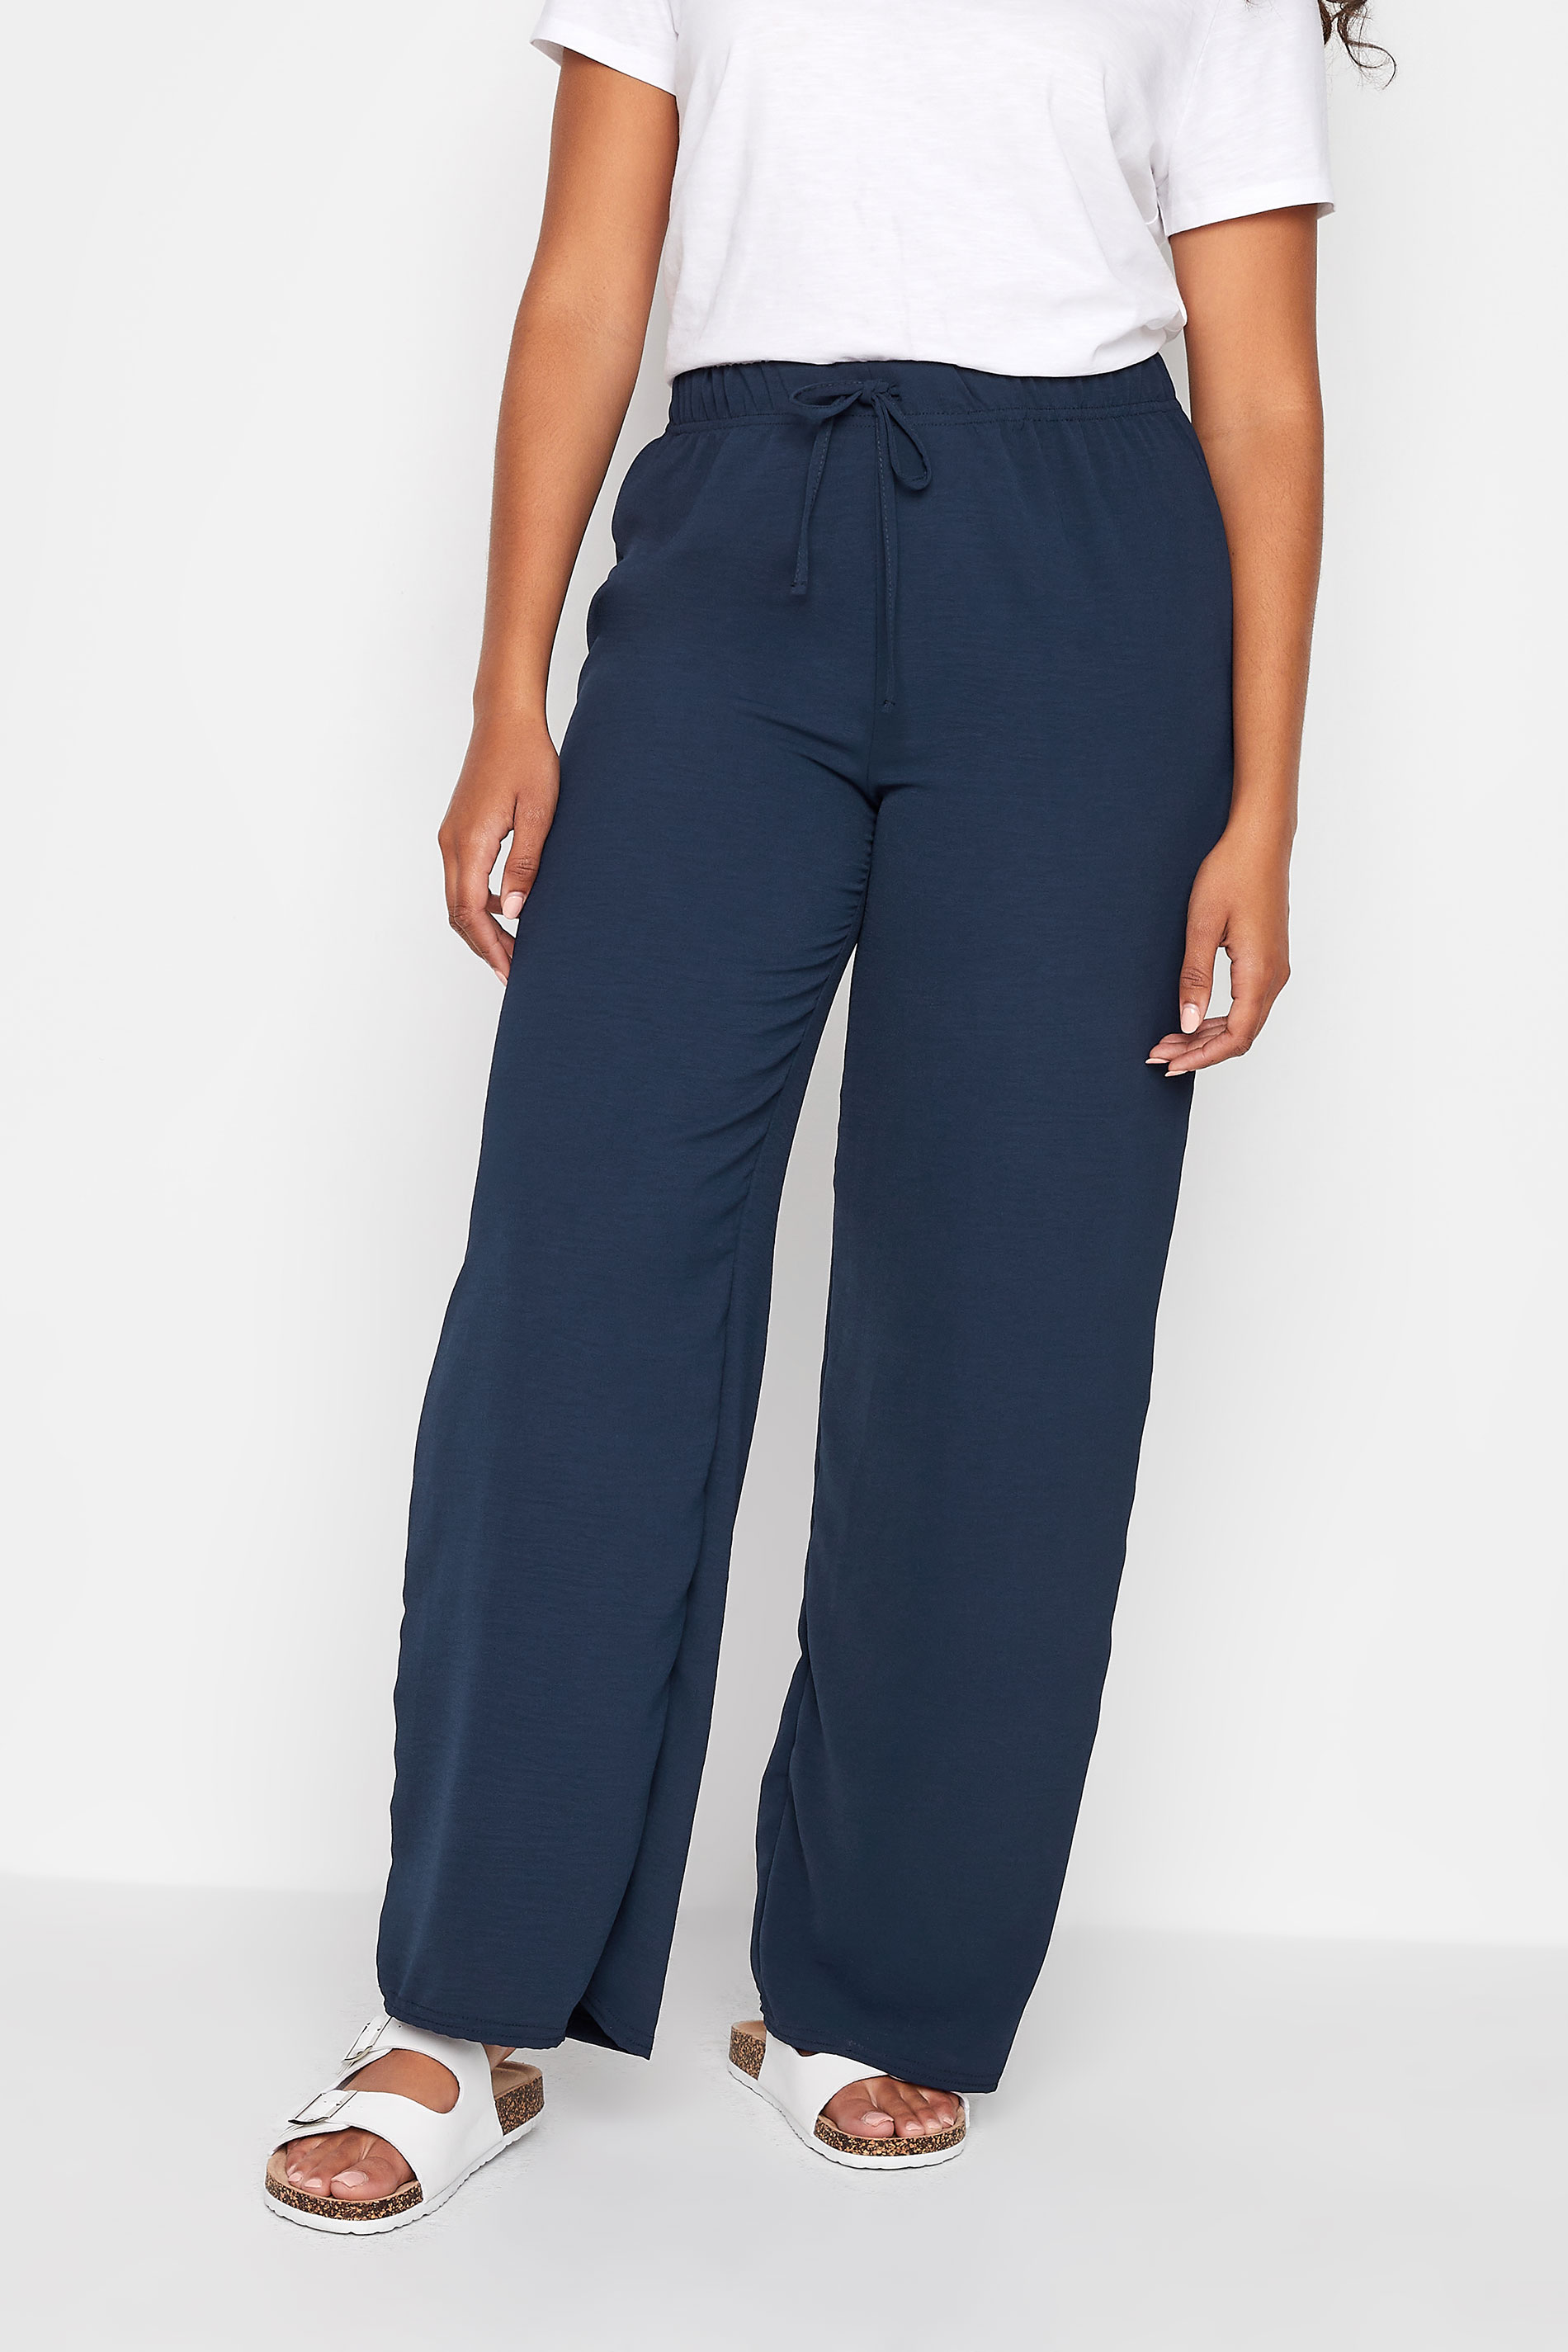 Elisabetta Franchi women's crepe trousers with logo clamps Butter |  Caposerio.com